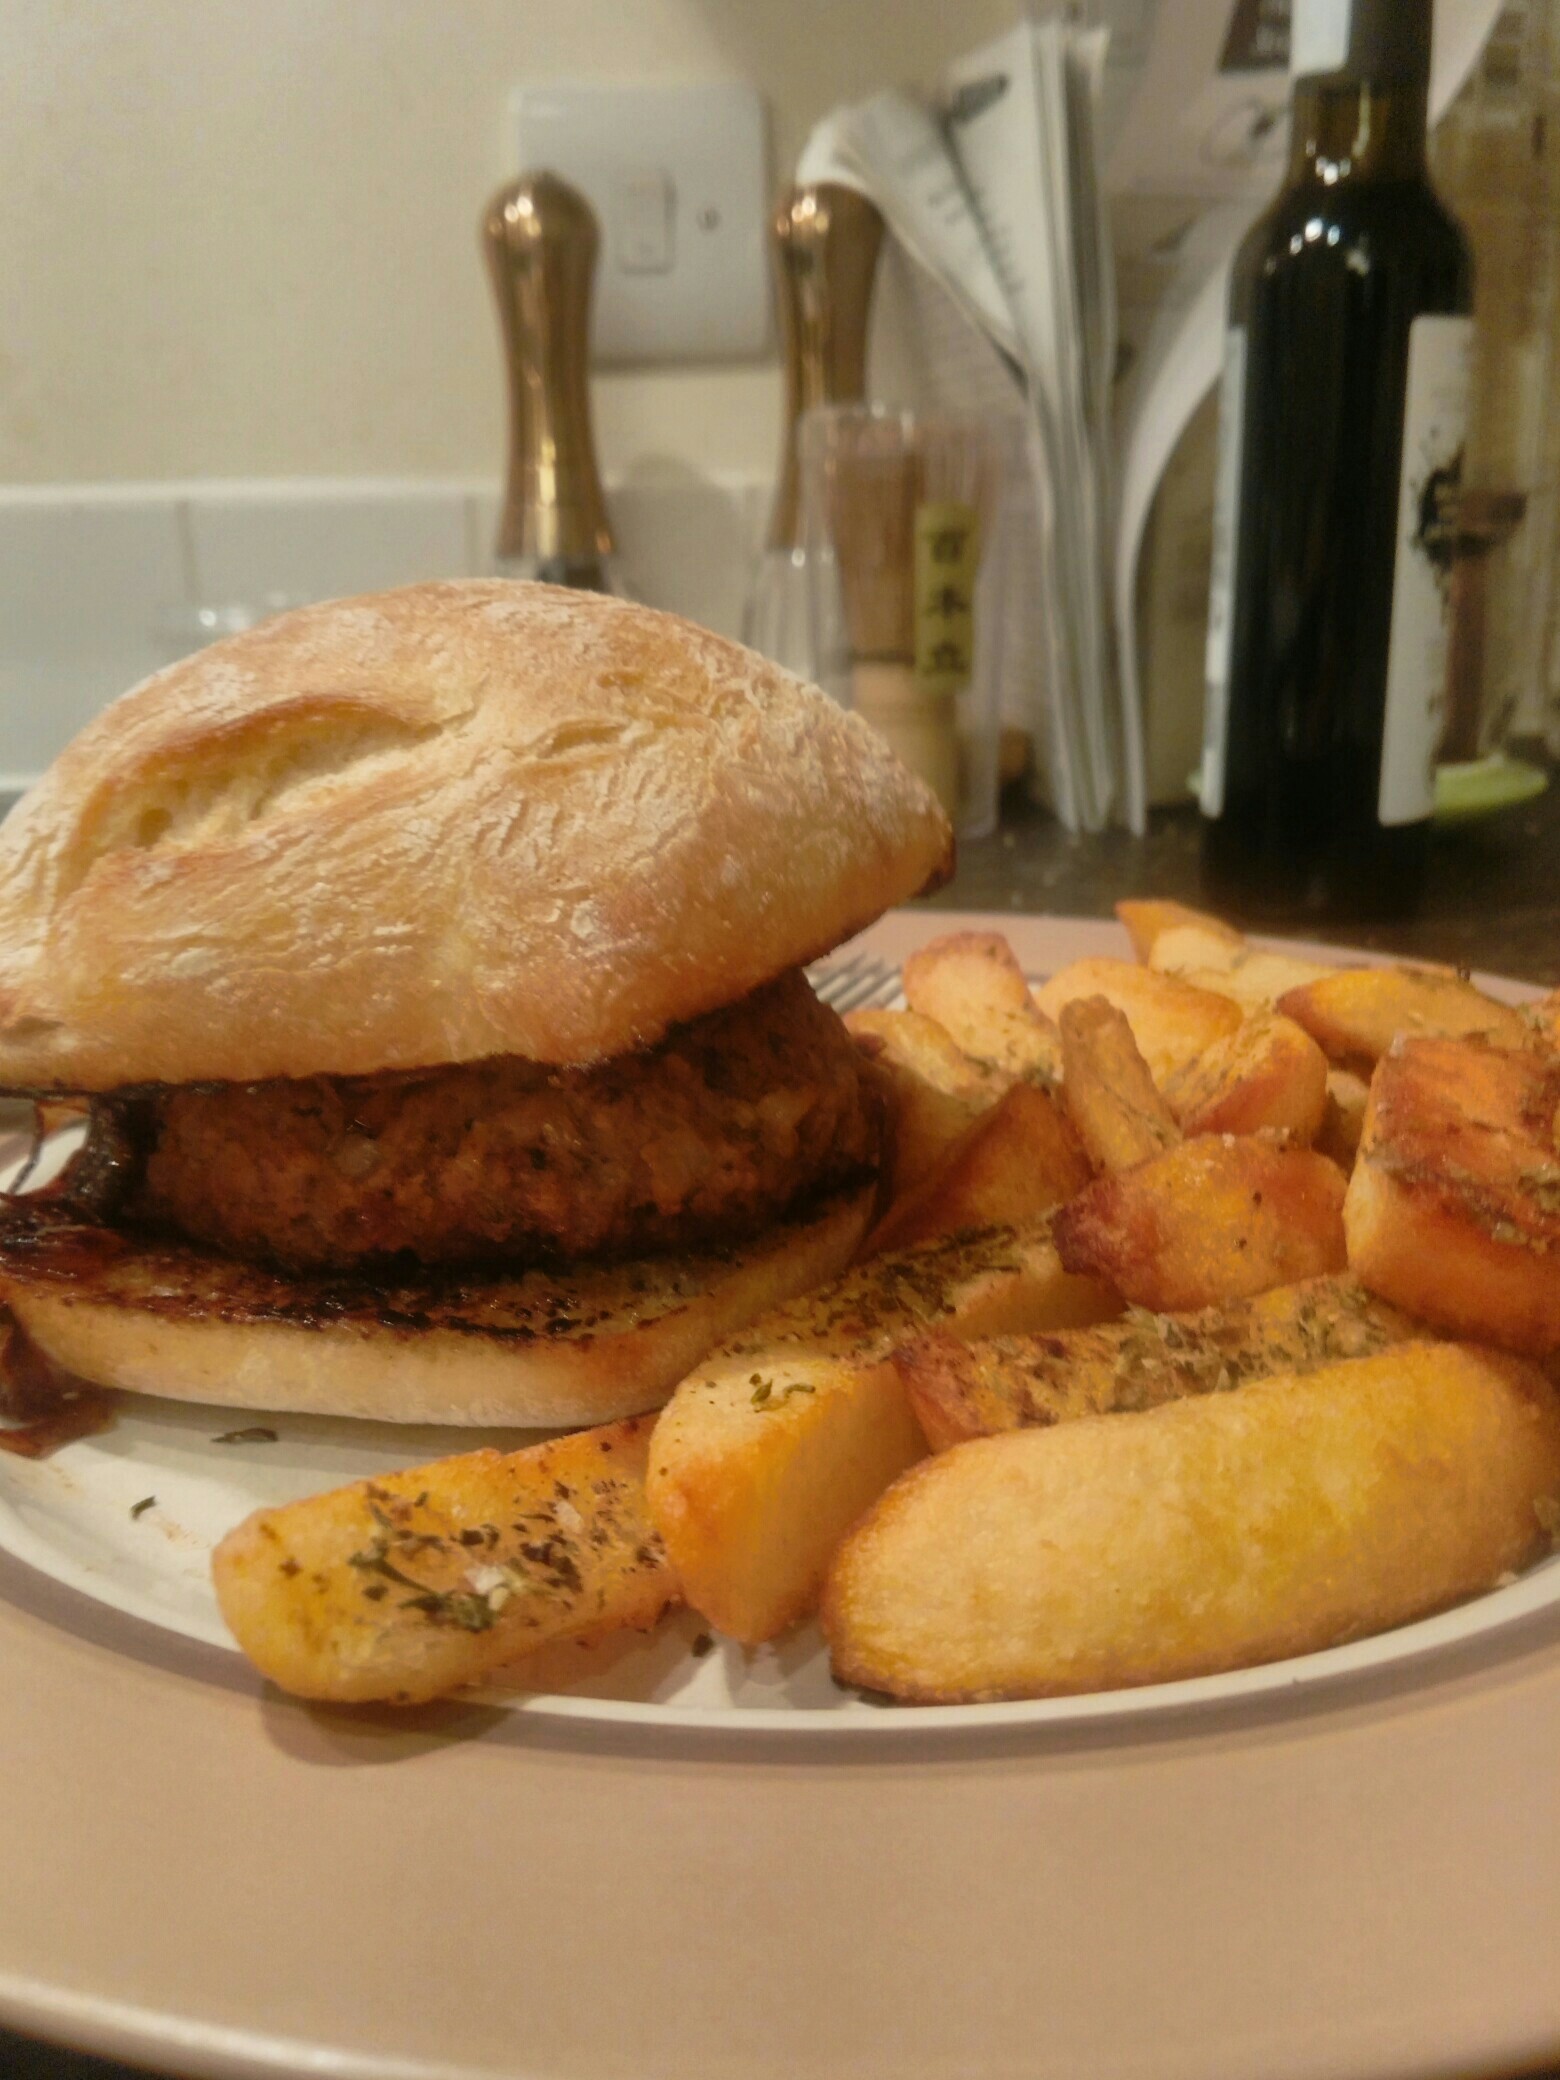 Burger in a bun and chips on a plate